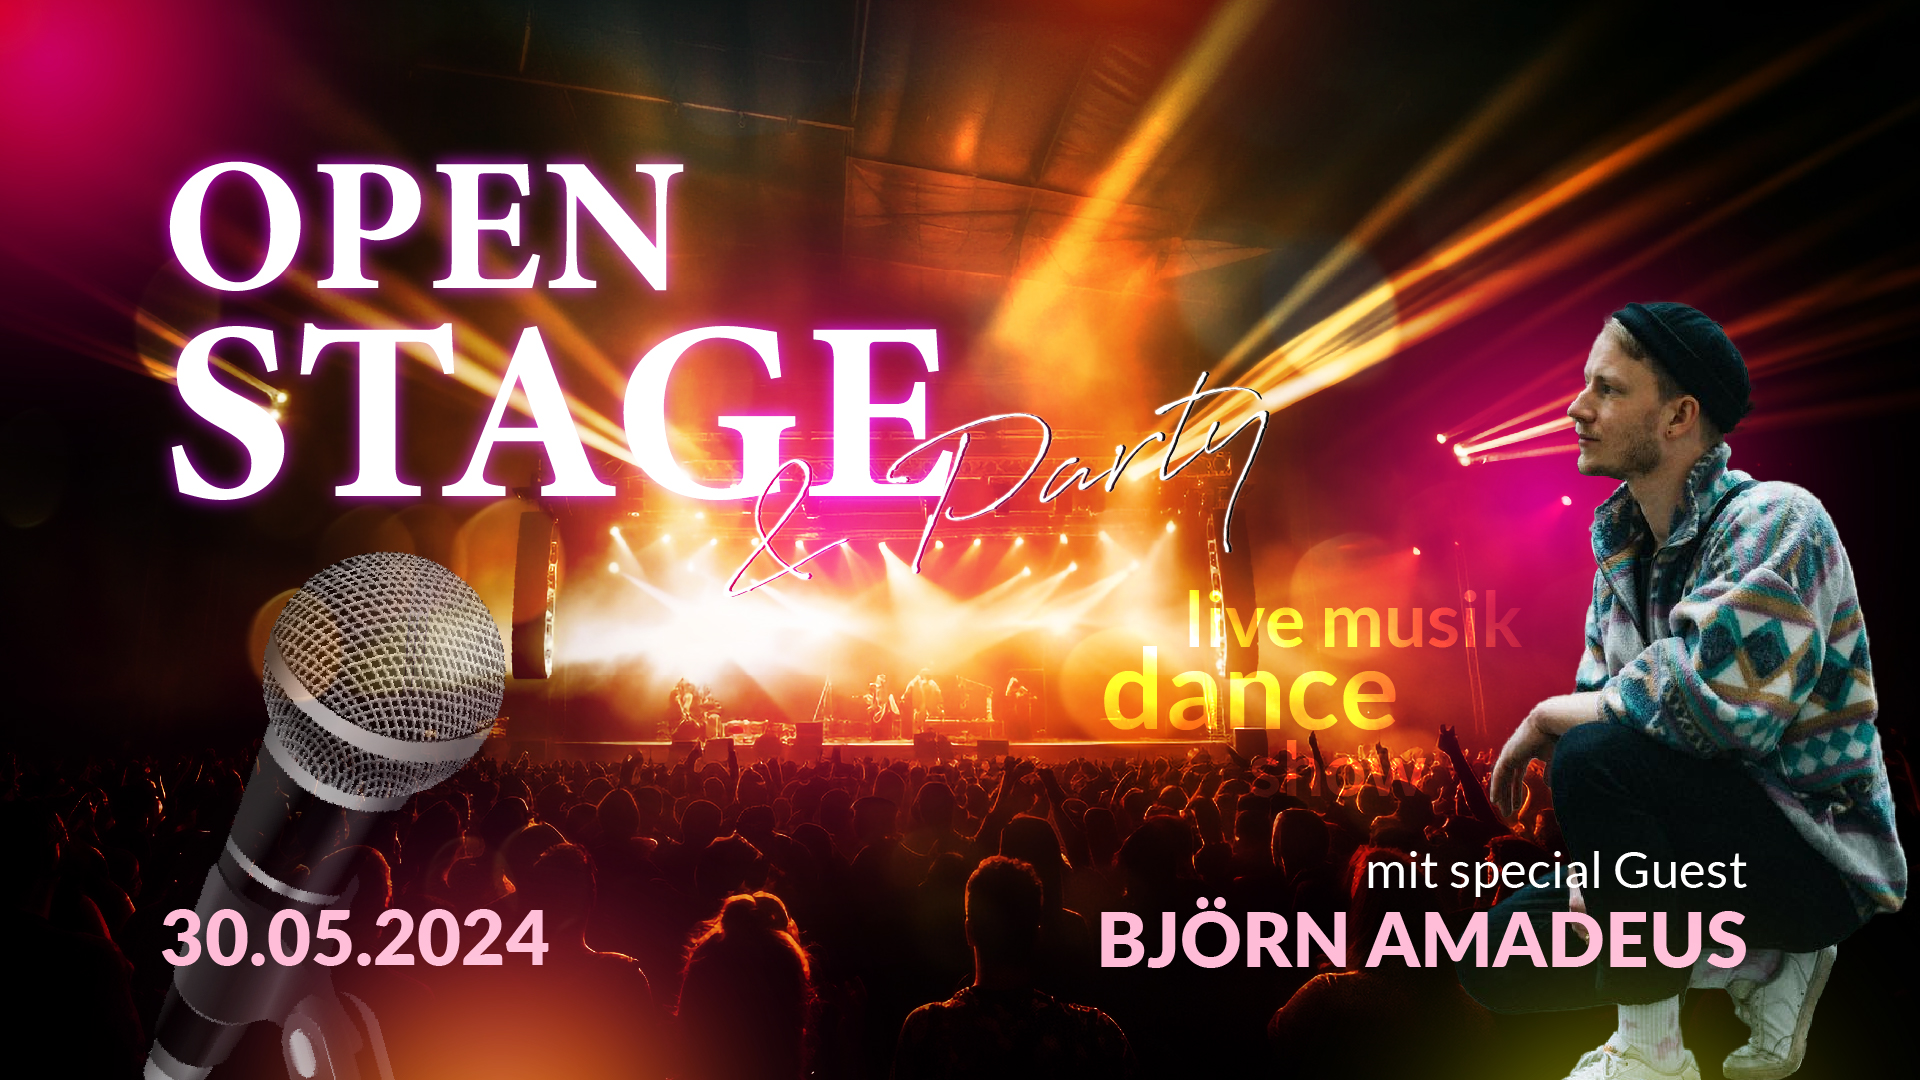 Open Stage & Party, 30.05.2024, mit special guest Björn Amadeus